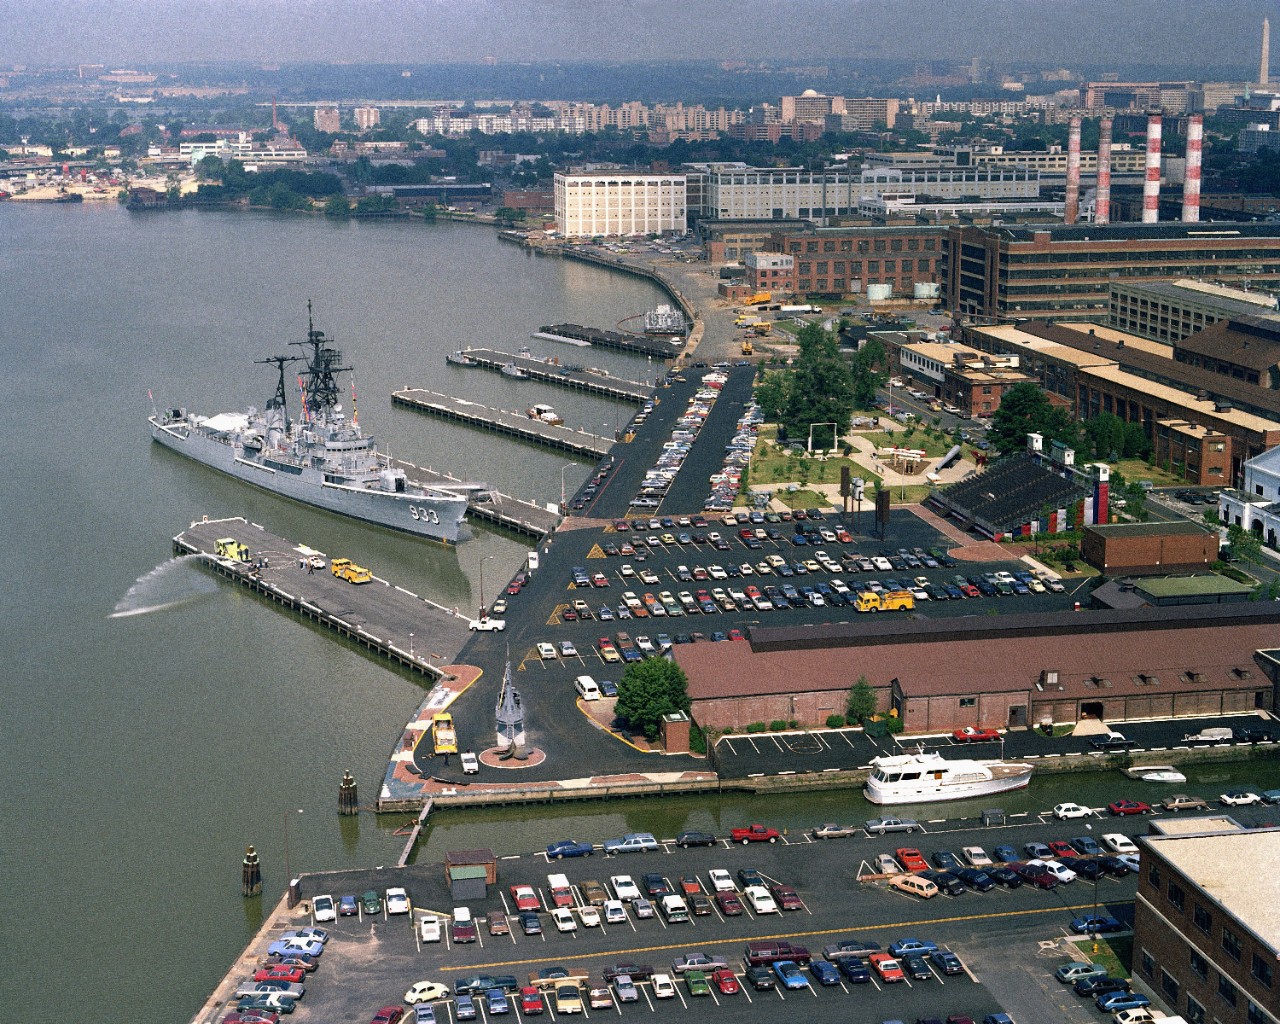 330-CFD-DN-SC-85-00008:   Display ship Barry (DD-933), Washington Navy Yard, 1985.    Aerial view of the decommissioned destroyer.   Official U.S. Navy Photograph, now in the collections of the National Archives.   